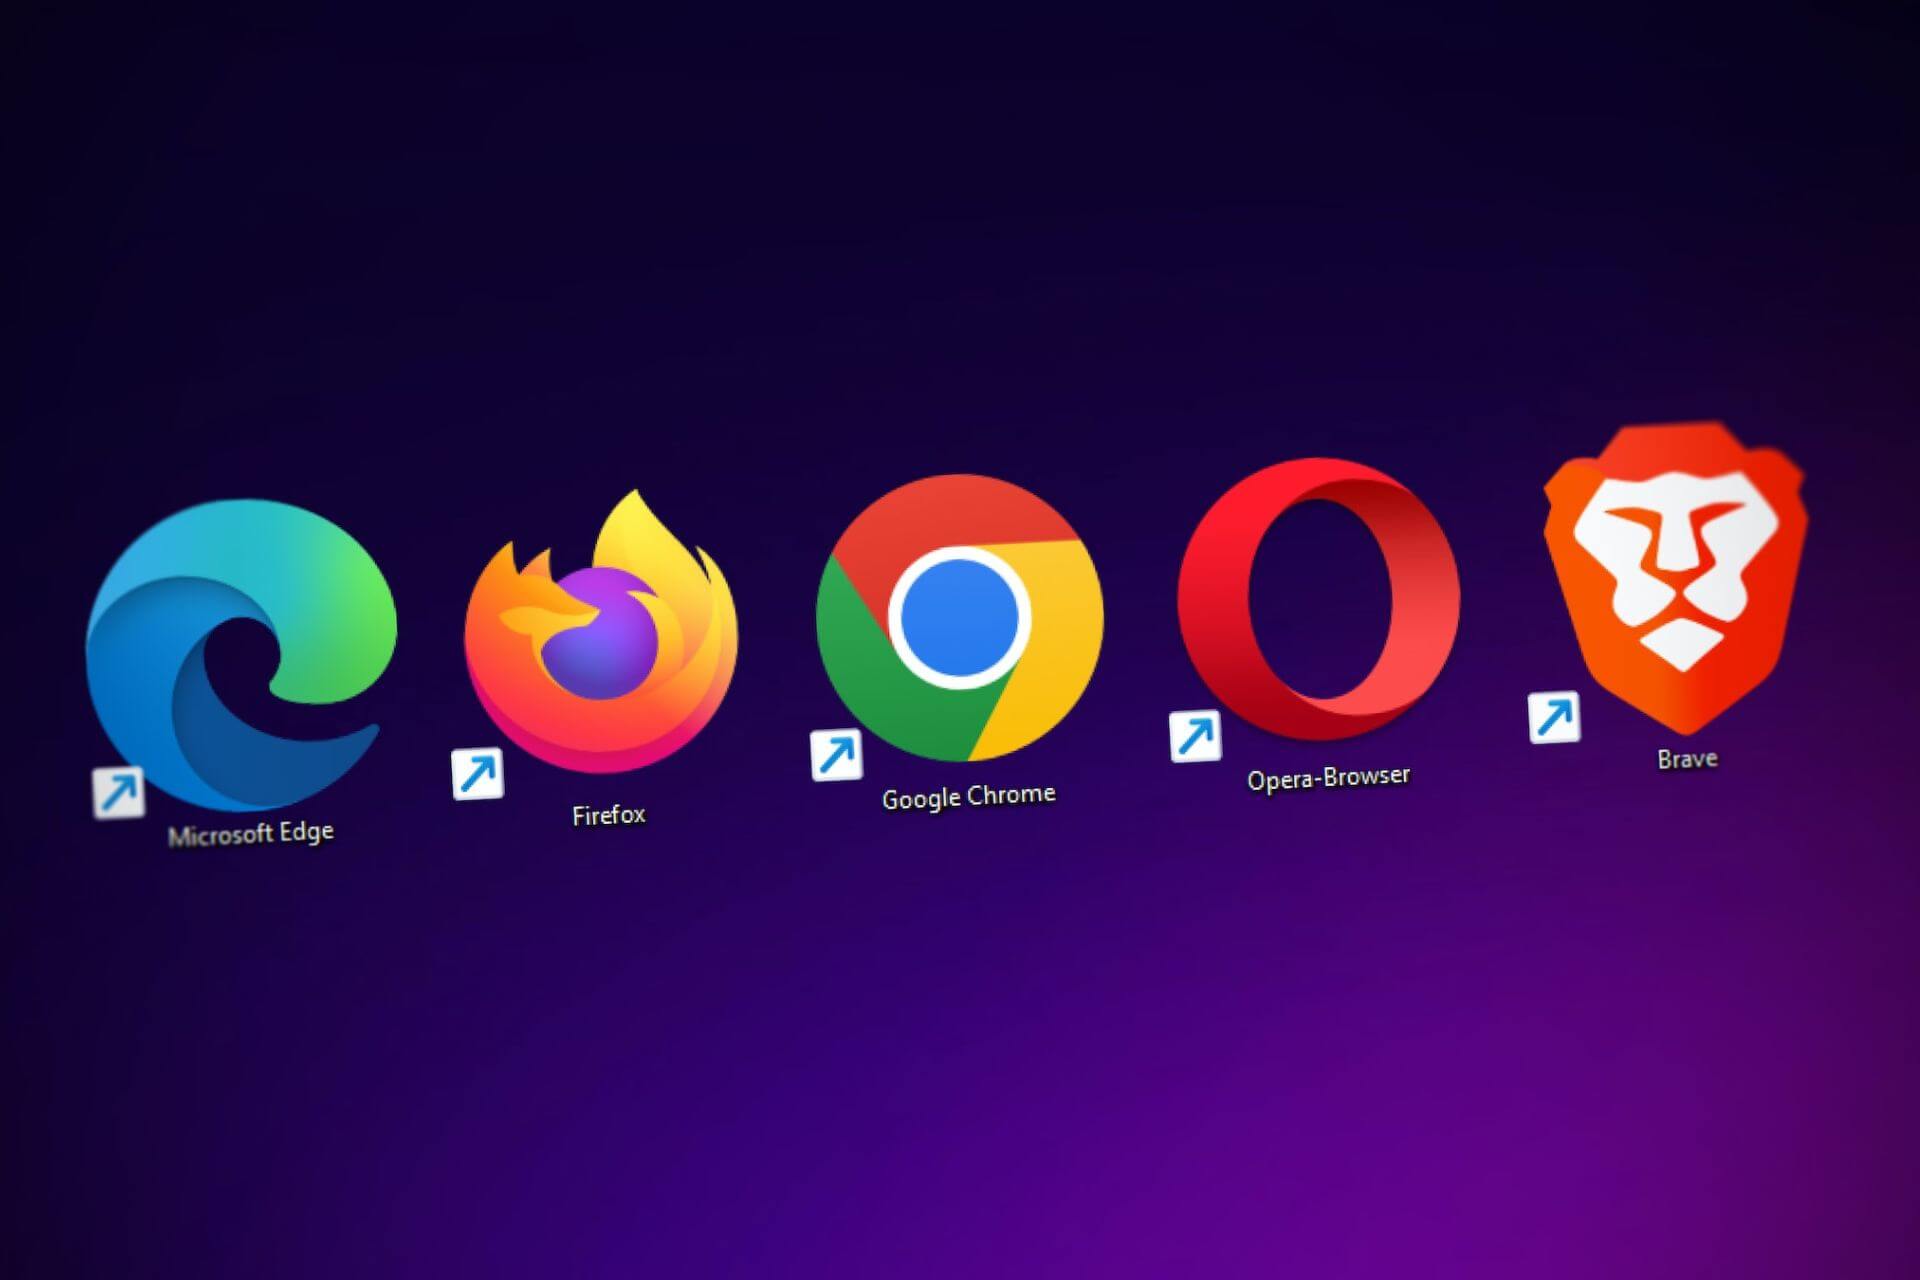 Icons for several web browsers with private browsing modes